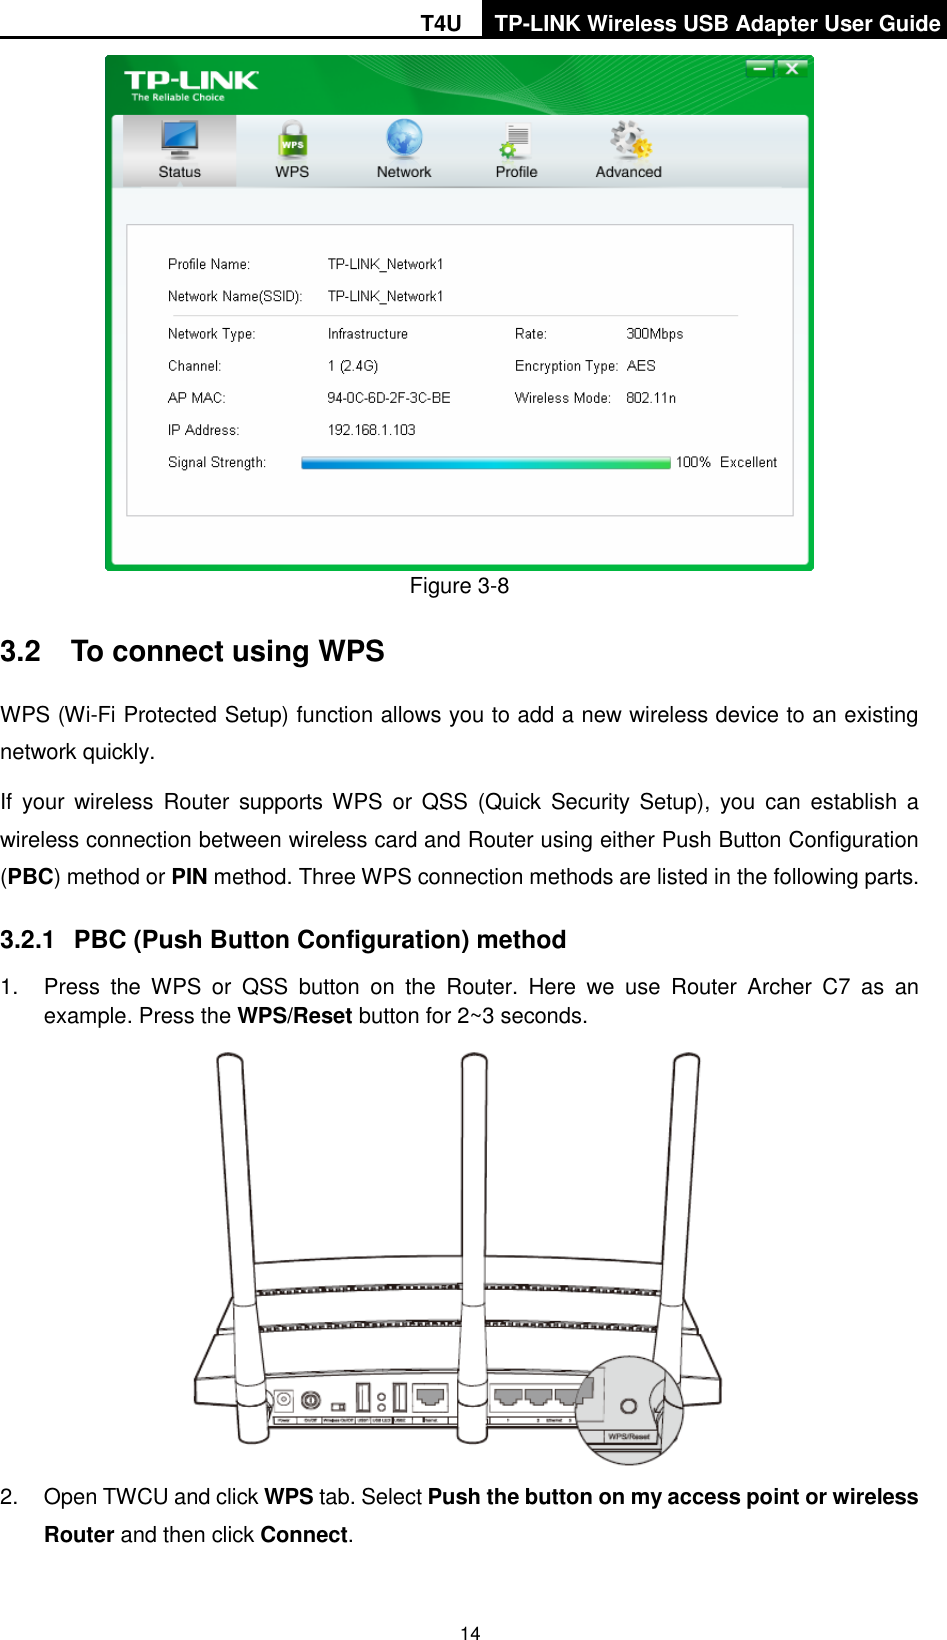 T4U TP-LINK Wireless USB Adapter User Guide   14  Figure 3-8 3.2  To connect using WPS WPS (Wi-Fi Protected Setup) function allows you to add a new wireless device to an existing network quickly. If  your  wireless  Router  supports WPS  or  QSS  (Quick  Security  Setup),  you  can  establish a wireless connection between wireless card and Router using either Push Button Configuration (PBC) method or PIN method. Three WPS connection methods are listed in the following parts. 3.2.1  PBC (Push Button Configuration) method 1.  Press  the  WPS  or  QSS  button  on  the  Router.  Here  we  use  Router  Archer  C7  as  an example. Press the WPS/Reset button for 2~3 seconds.  2.  Open TWCU and click WPS tab. Select Push the button on my access point or wireless Router and then click Connect.   